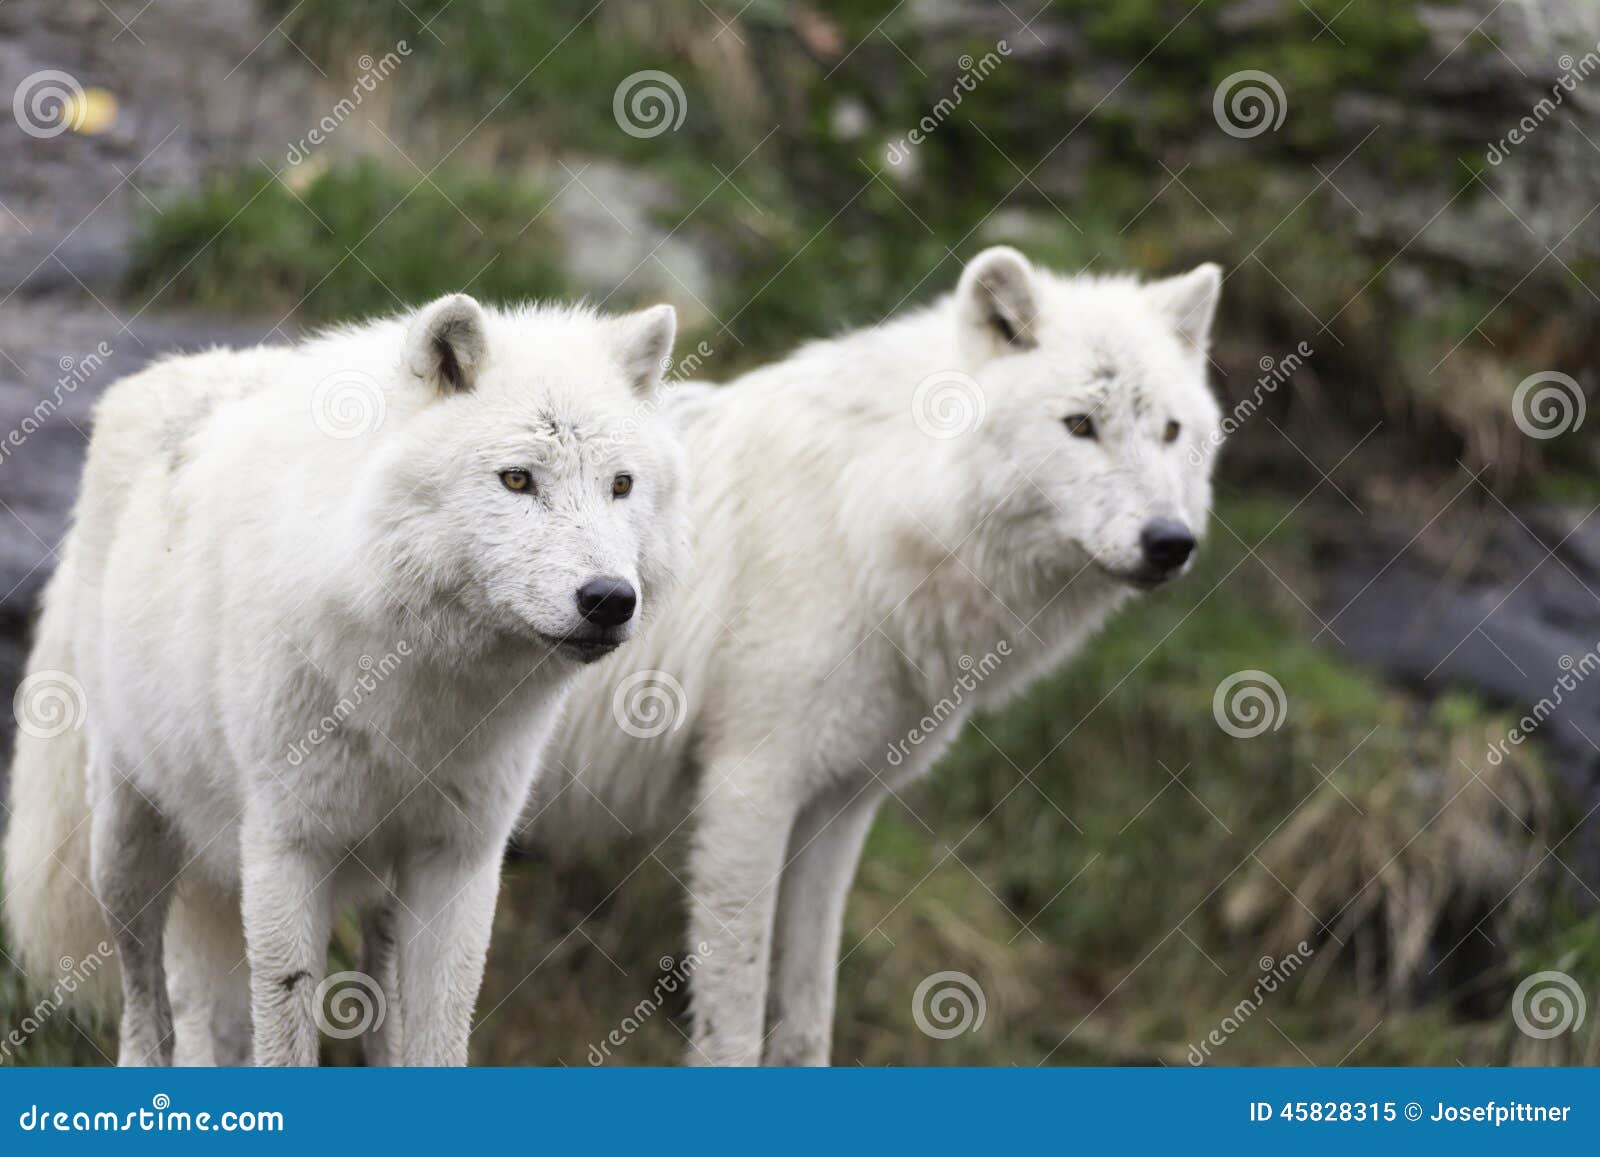 Pair of Arctic Wolves in a Fall, Forest Environment Stock Image - Image ...